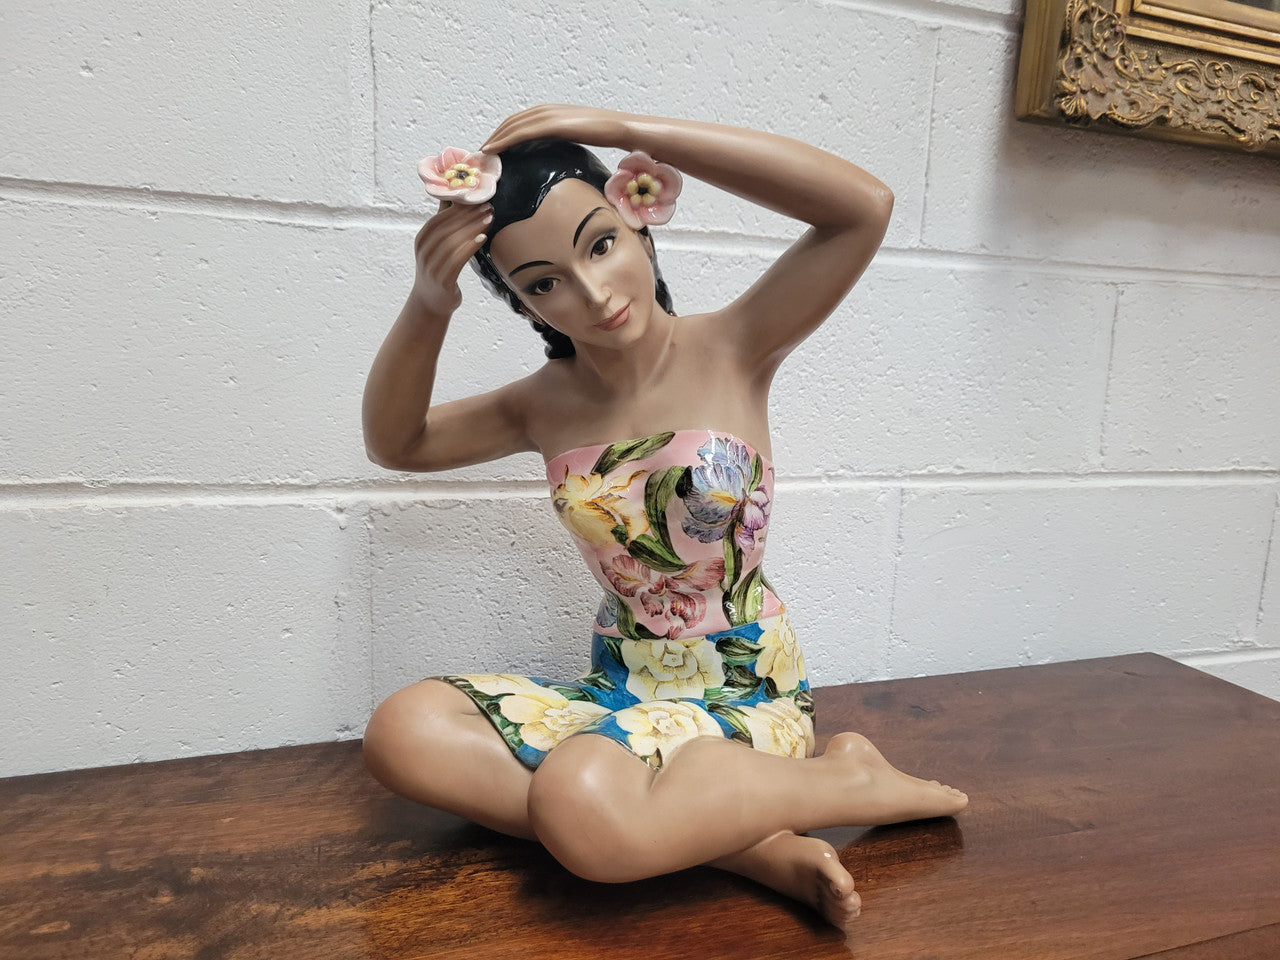 Large, Striking, Vintage Art Deco Tropical female porcelain figurine by Lenci Artist RONZAN, Italy.  Beautifully modelled she is wearing a gorgeous polychrome strapless dress and flowers in her hair. Circa 1950’s.